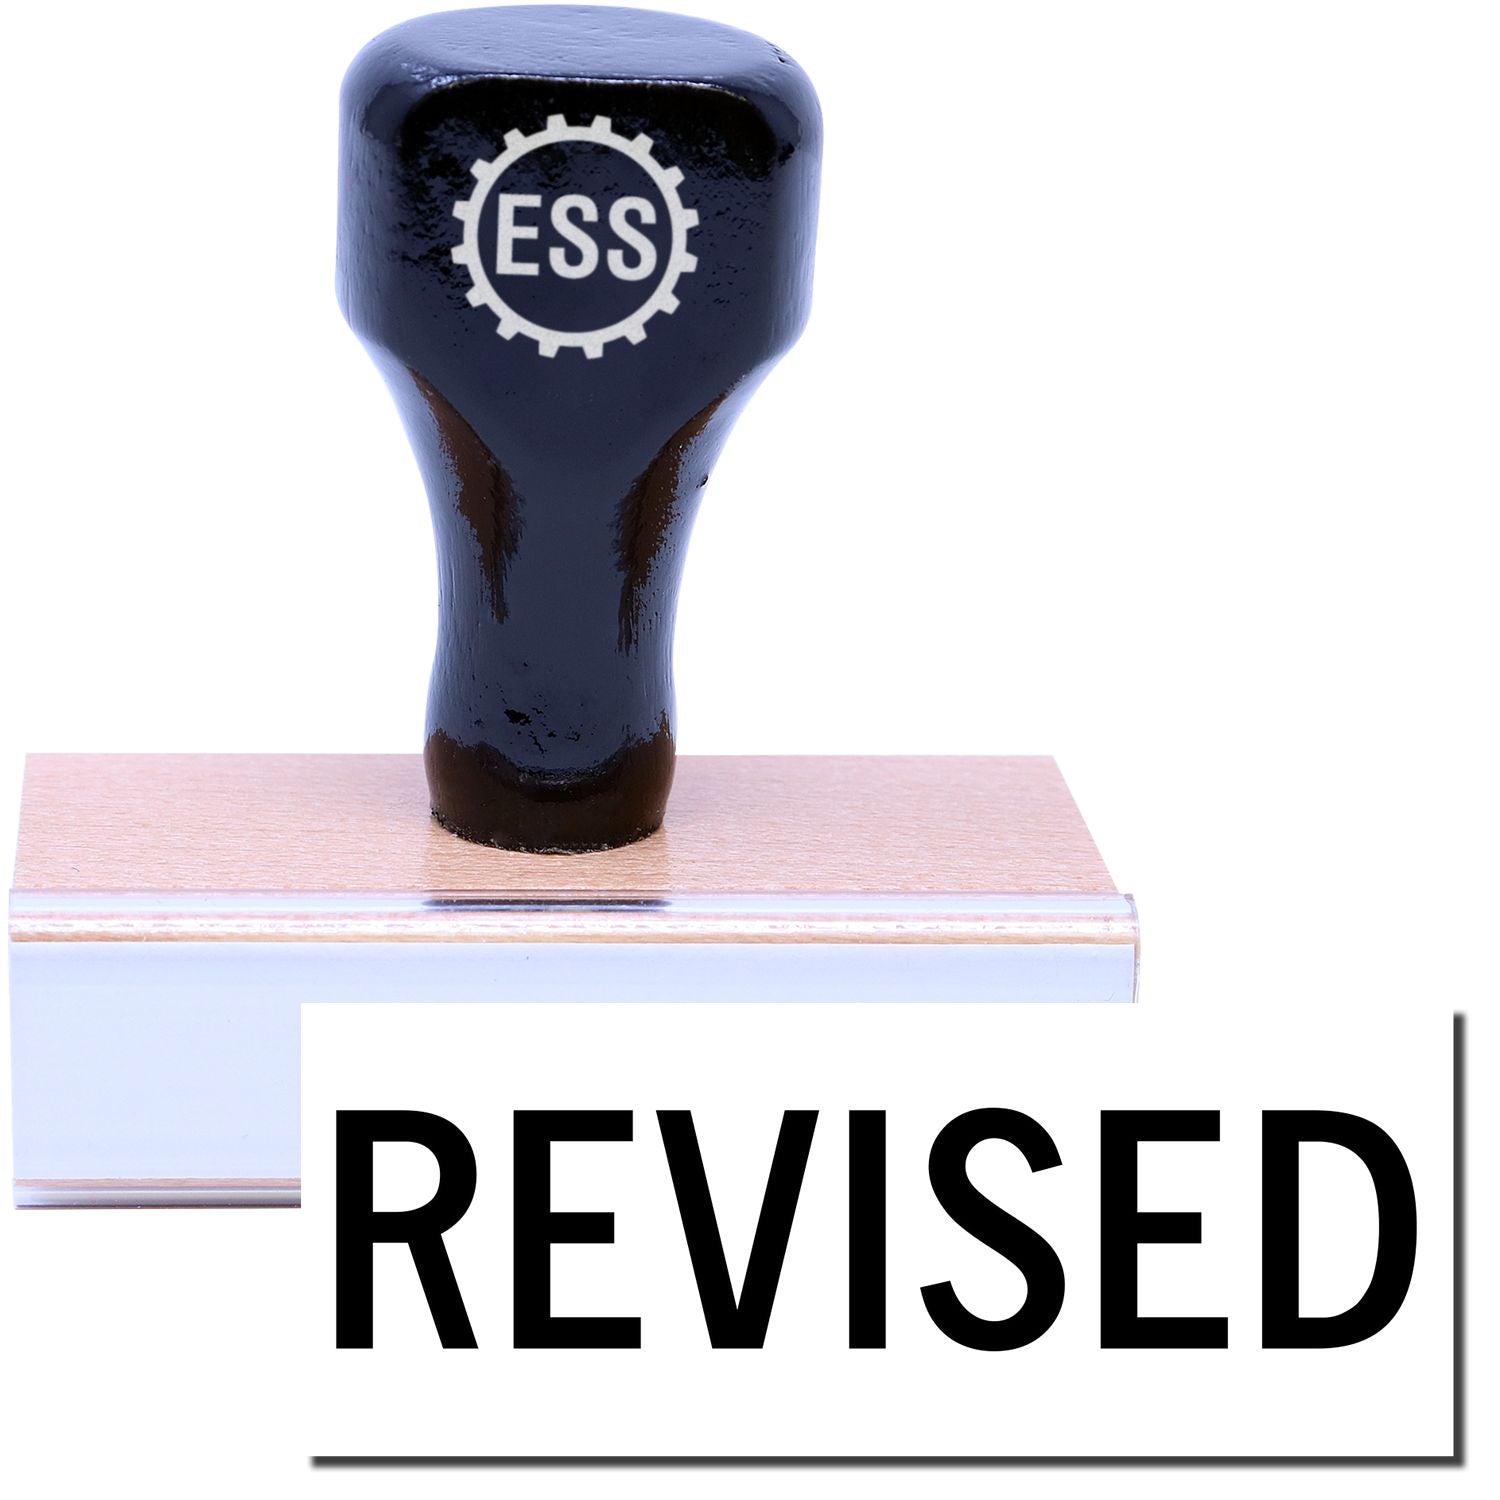 A stock office rubber stamp with a stamped image showing how the text "REVISED" in a large font is displayed after stamping.